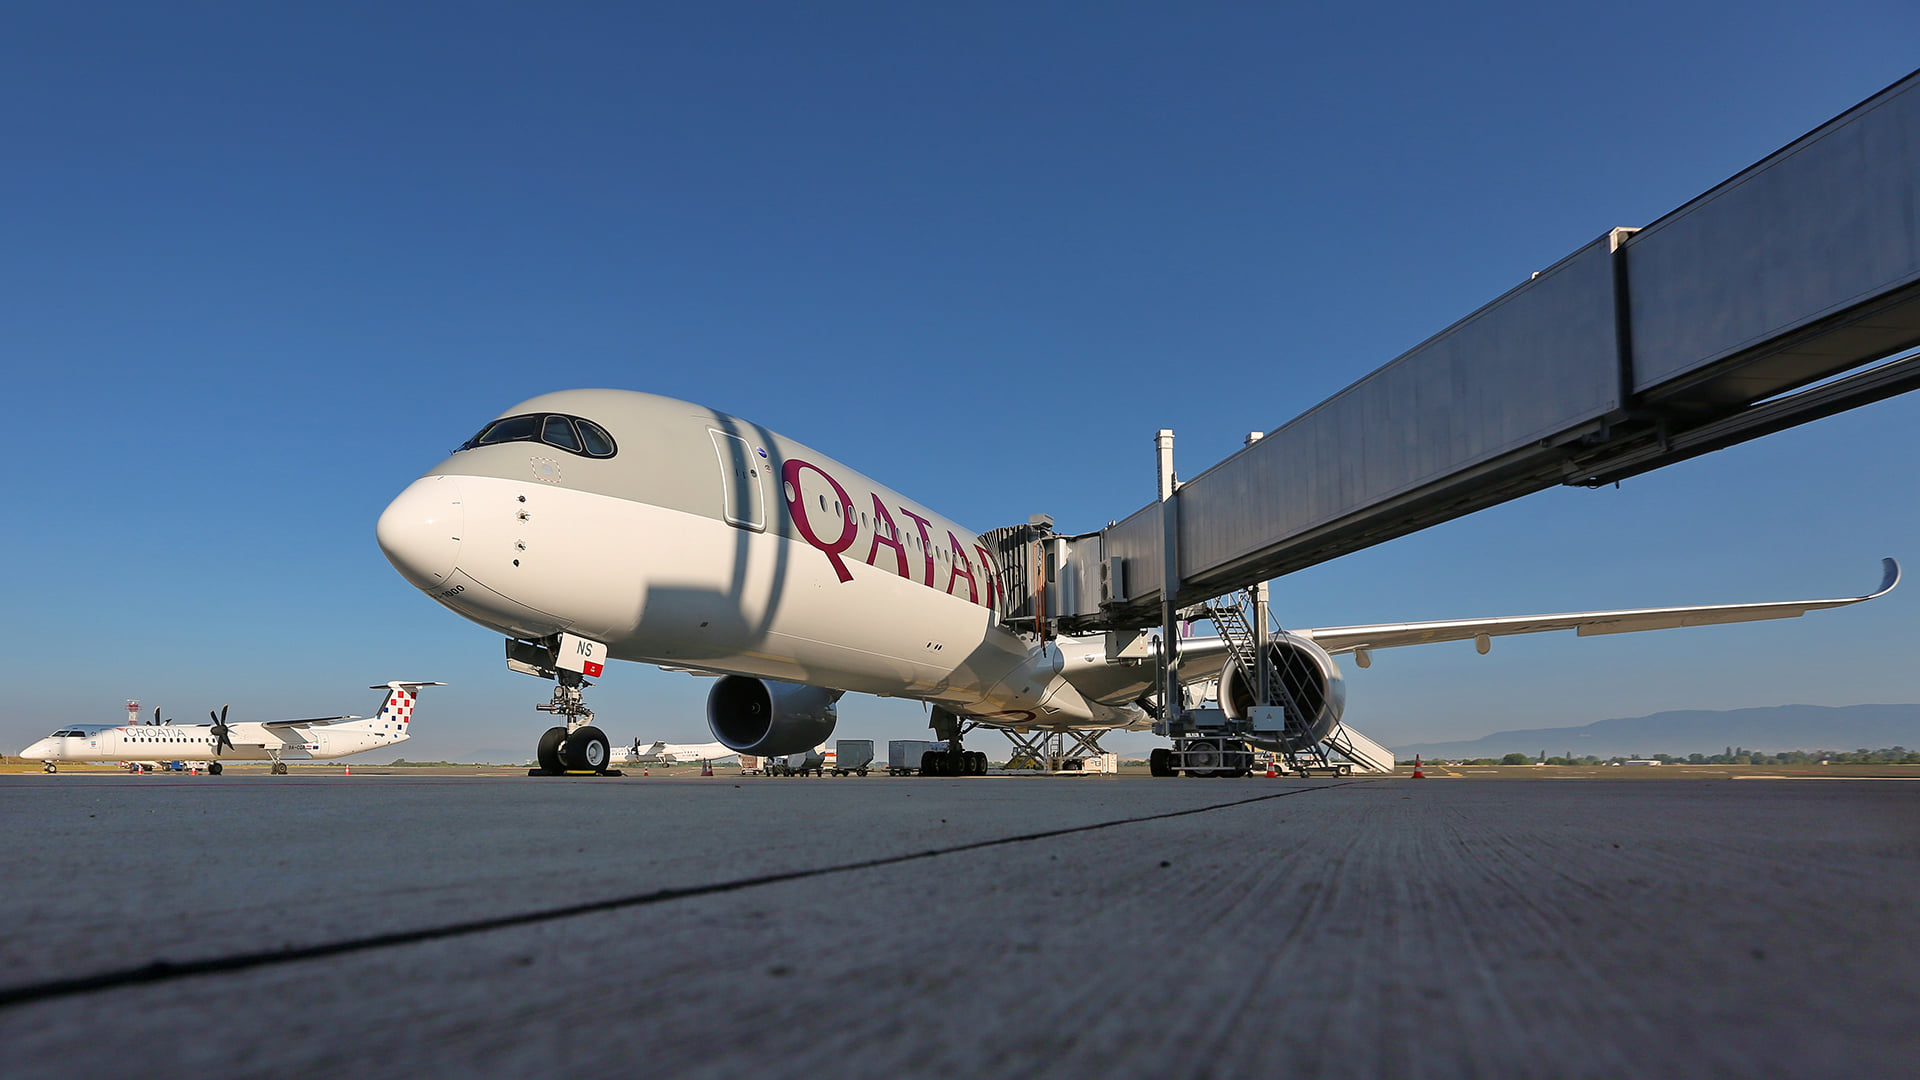 Qatar Airways' A350-1000 aircraft lands at Zagreb Airport for first time in history